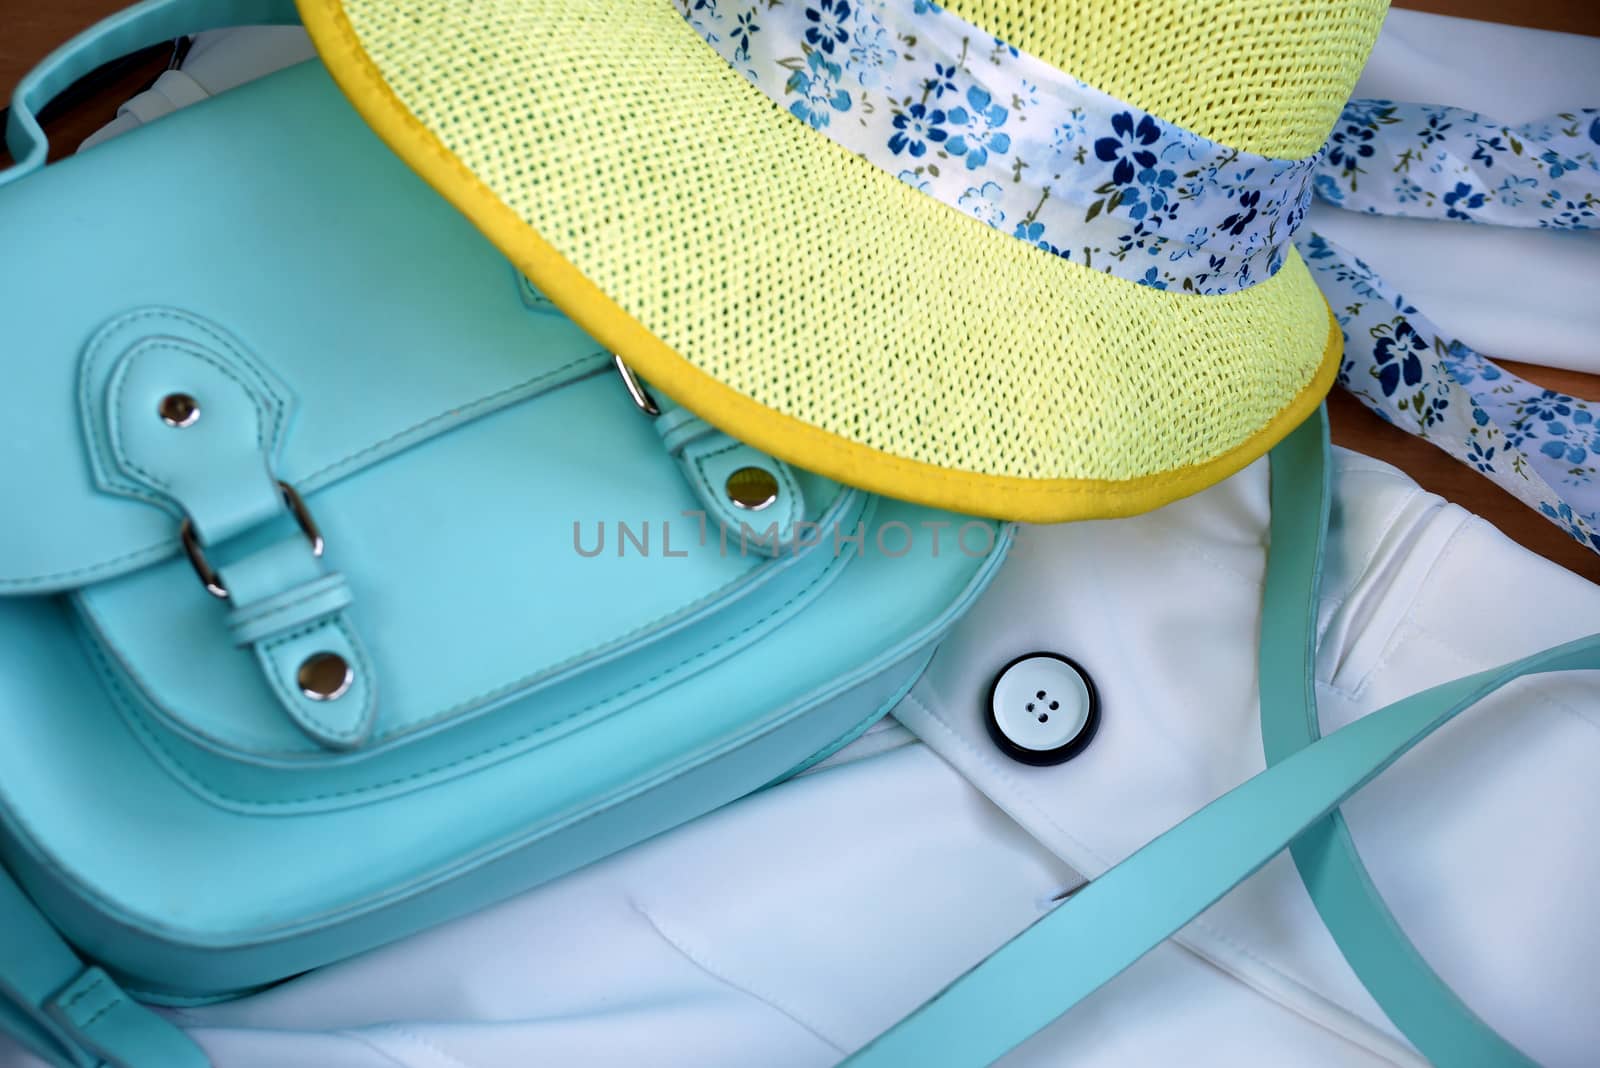 Women turquoise bag and yellow hat on a white jacket